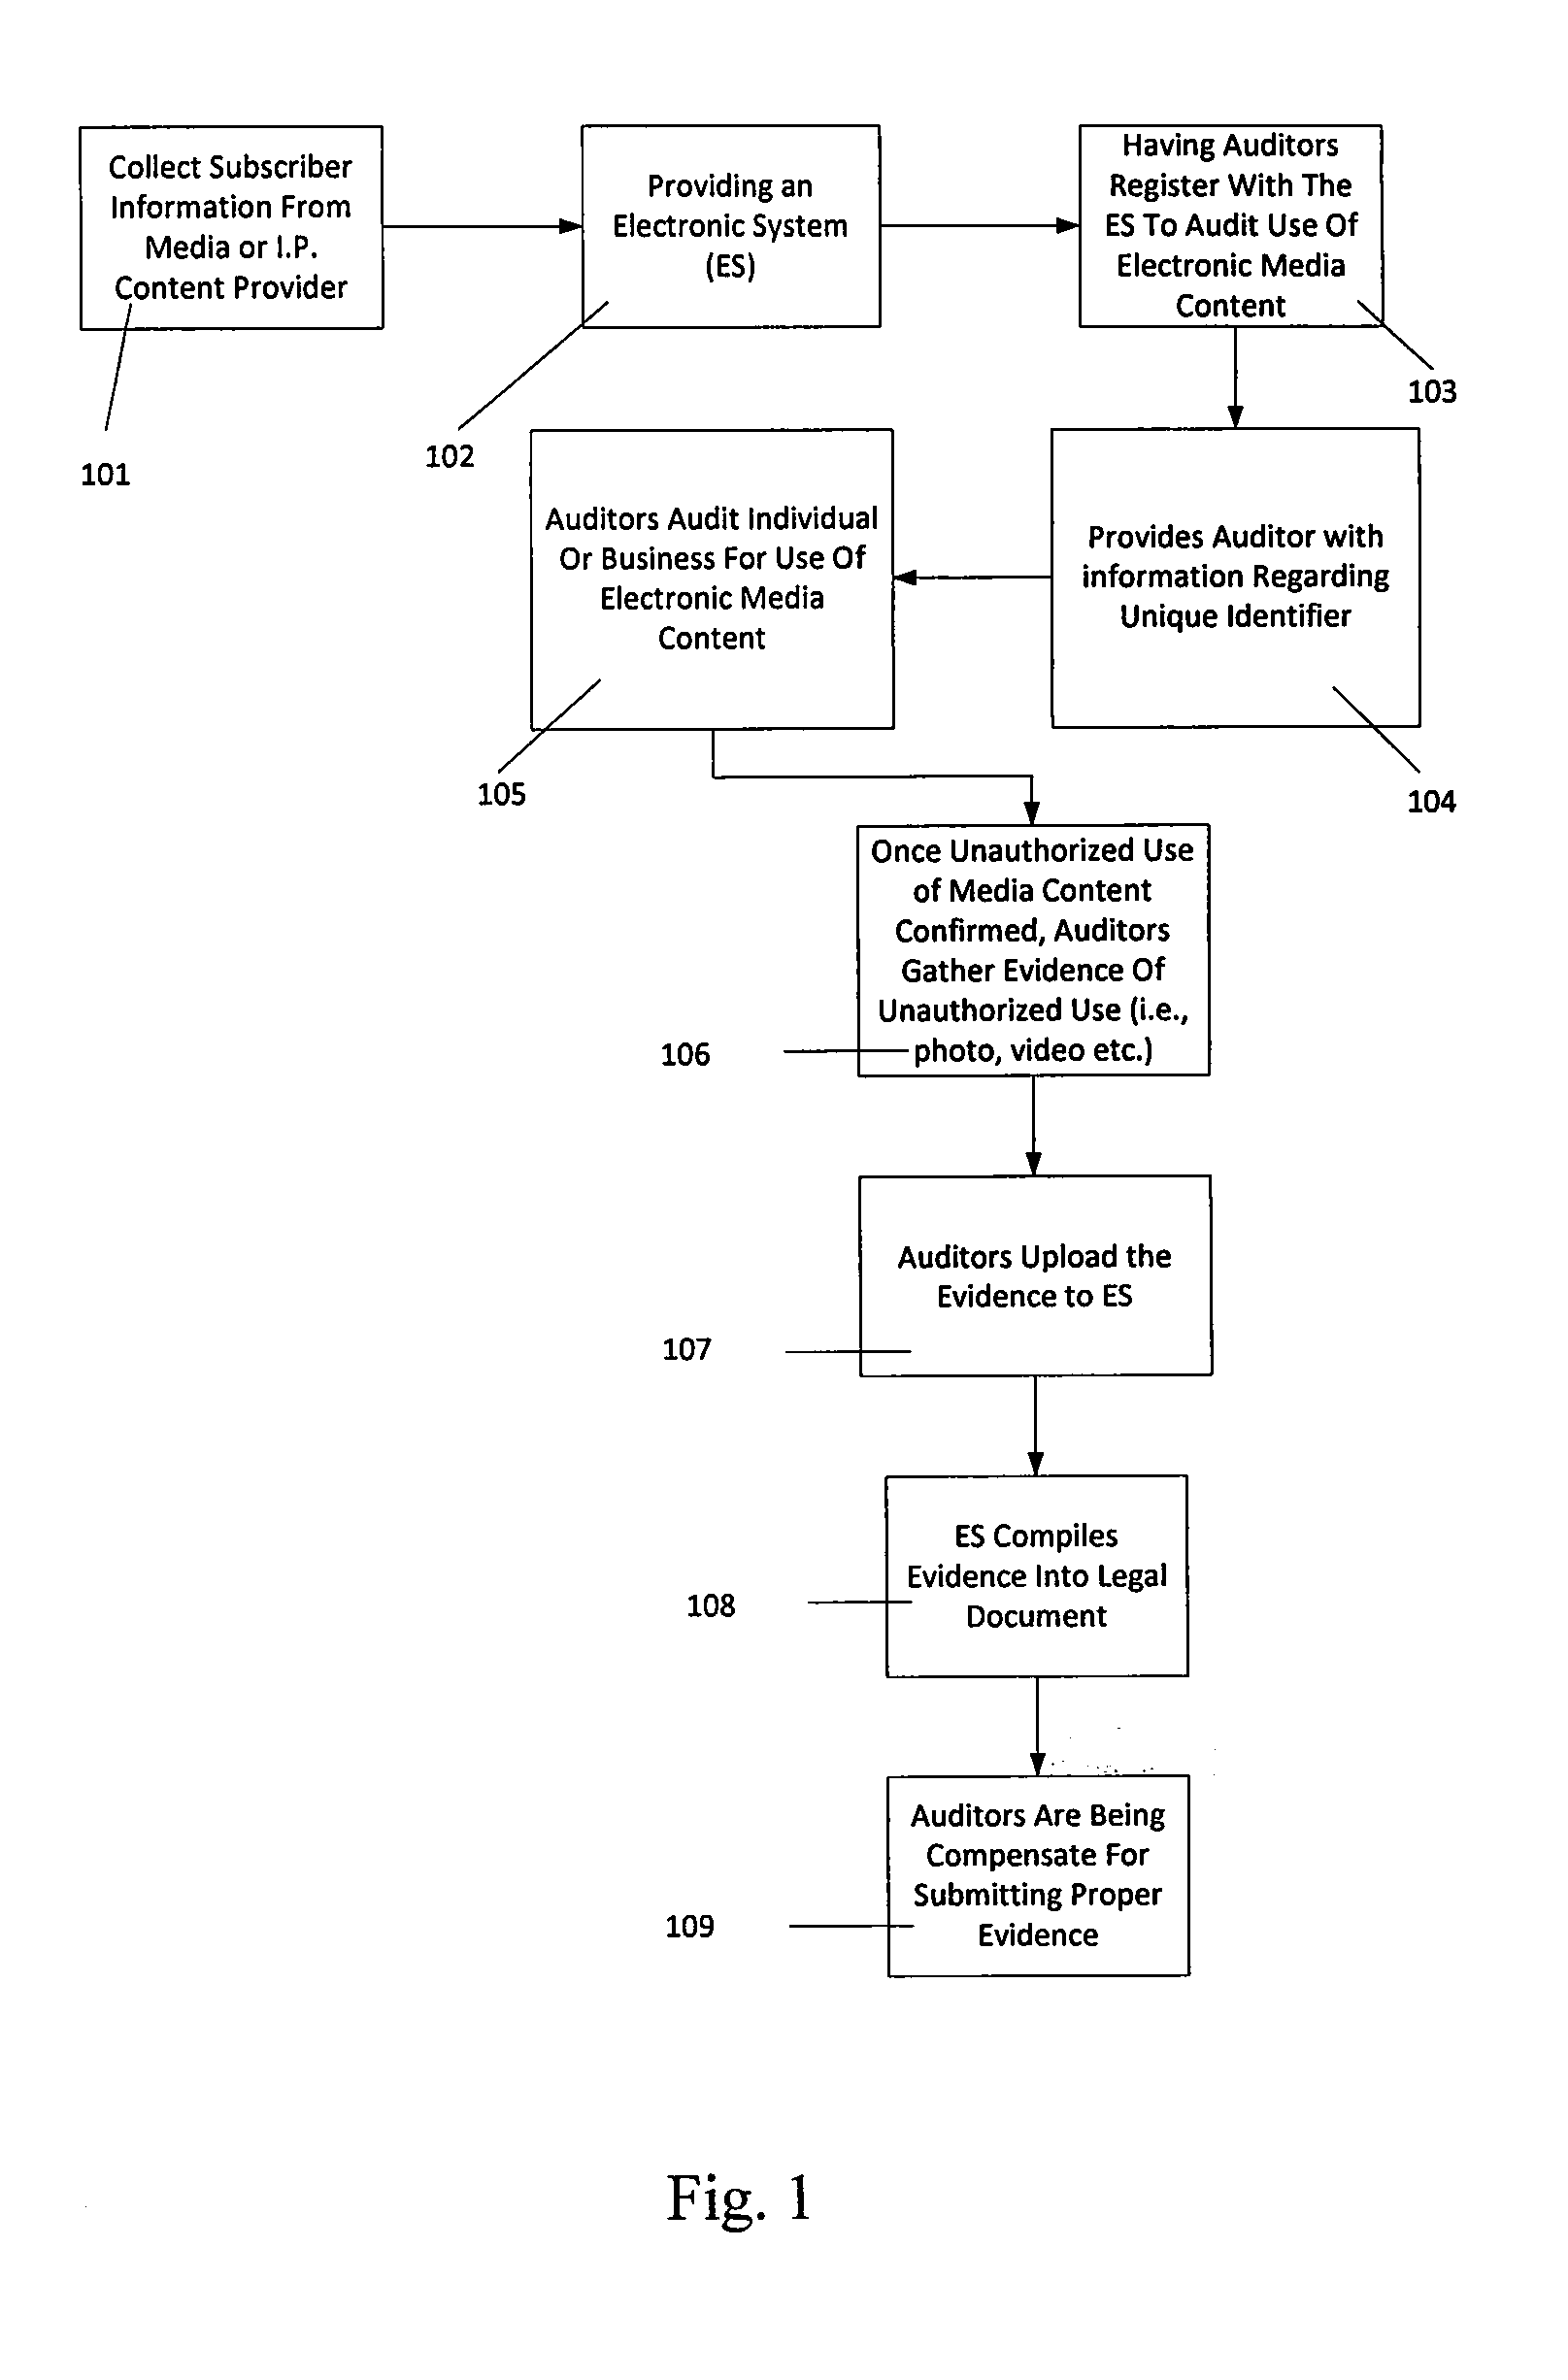 Methods and systems for detecting, verifying, preventing and correcting or resolving unauthorized use of electronic media content